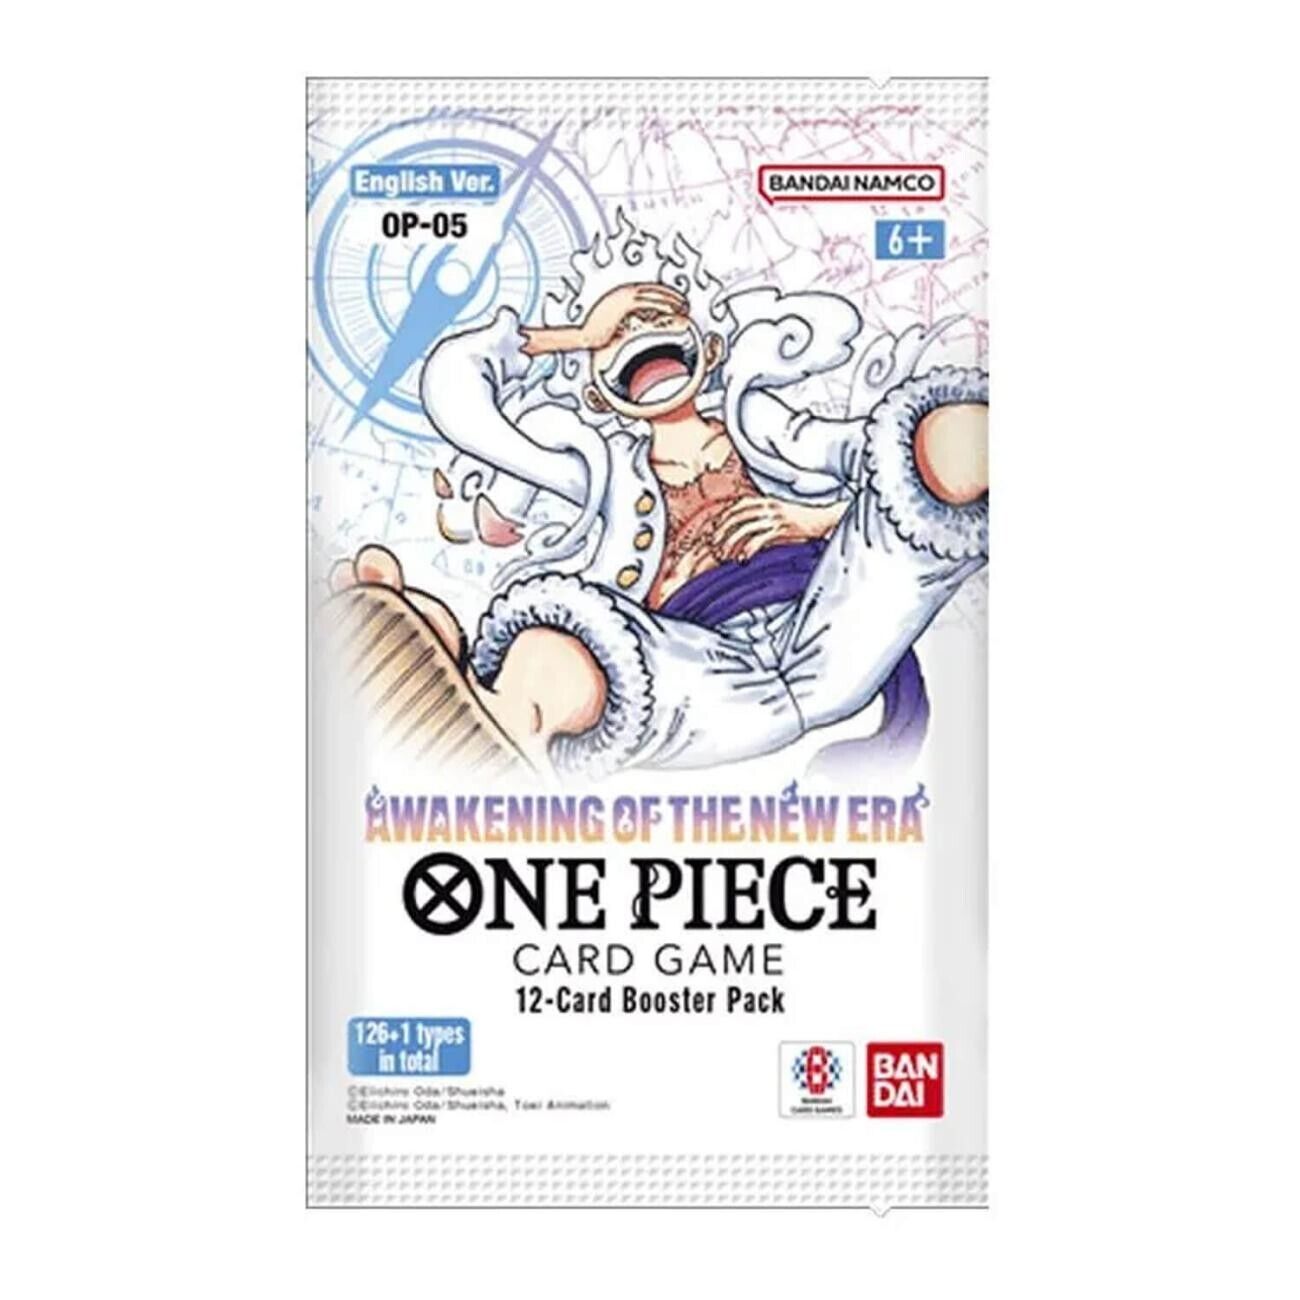 One piece: Awakening of the New Era Booster Pack | Cards and Coasters CA